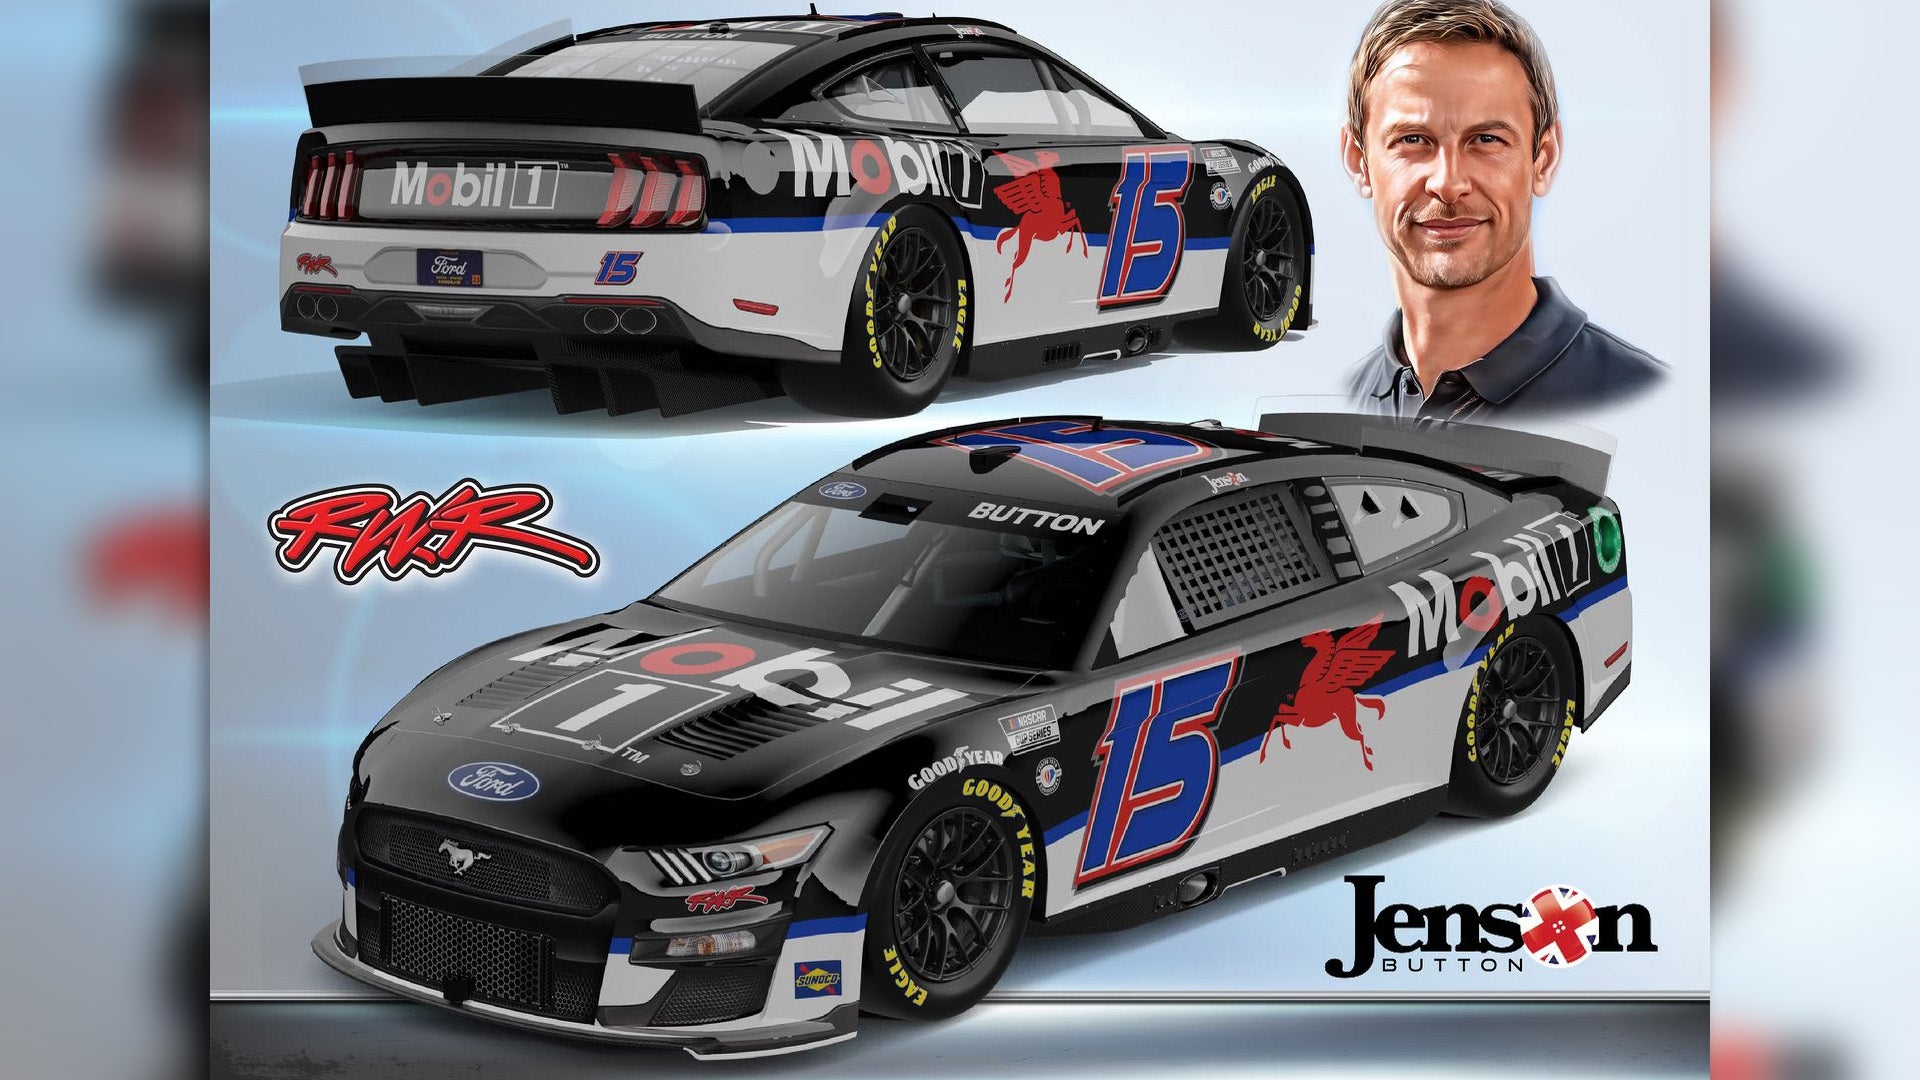 Jenson Button Will Race NASCAR Ford Mustang at COTA, Chicago, Indy